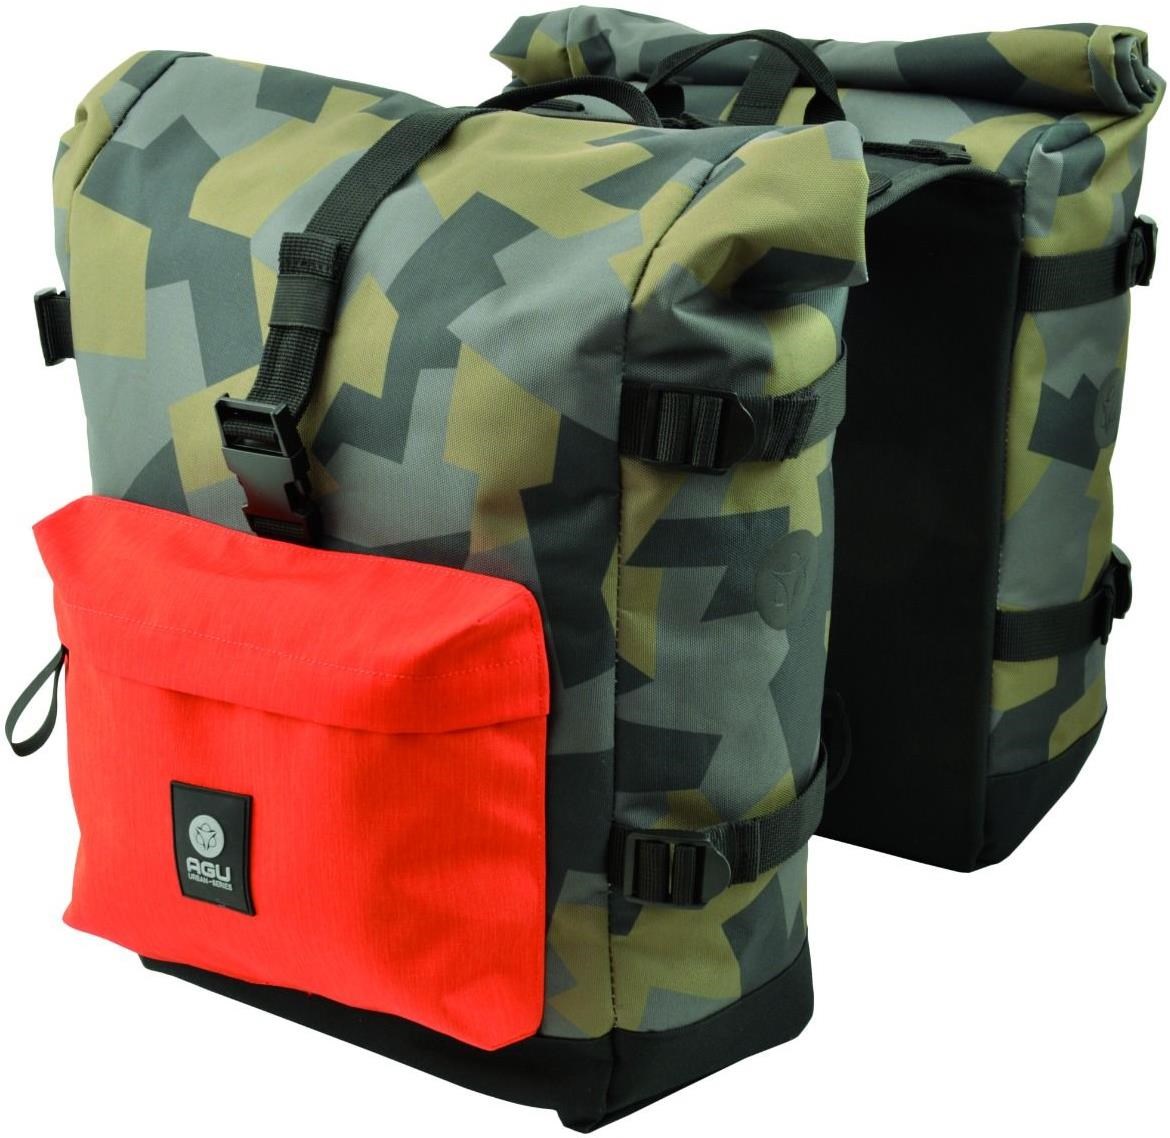 Agu Urban Trend H2O Roll-Top Waterproof Double Pannier Bags product image